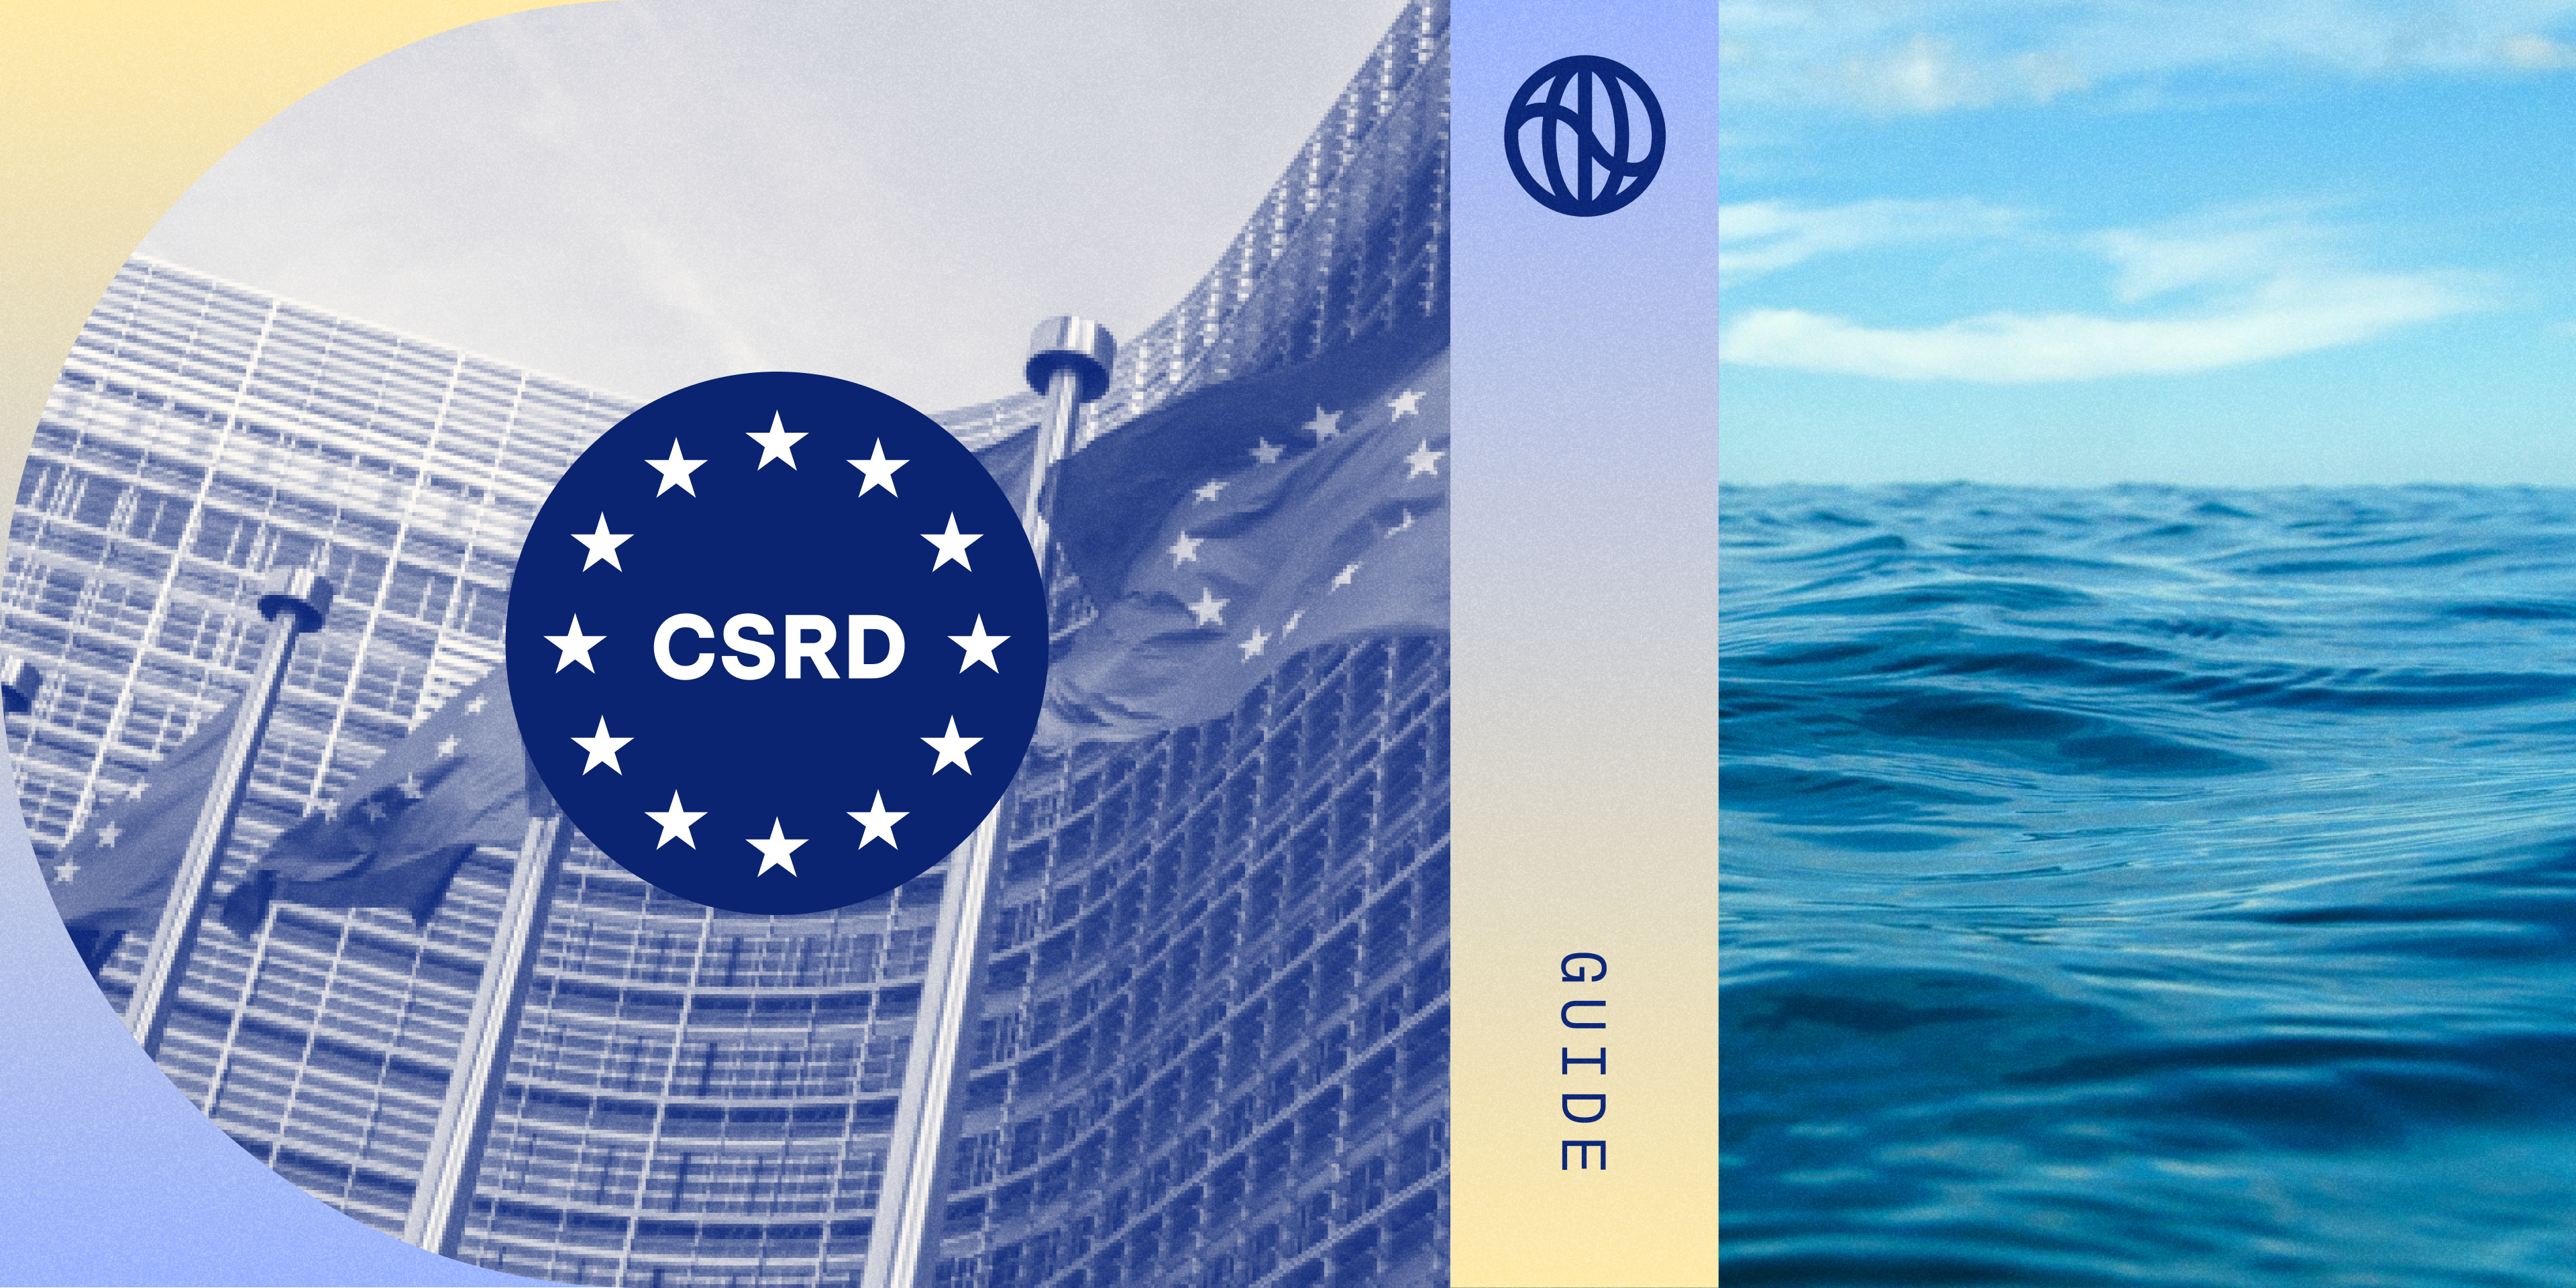 Natural imagery with the CSRD logo